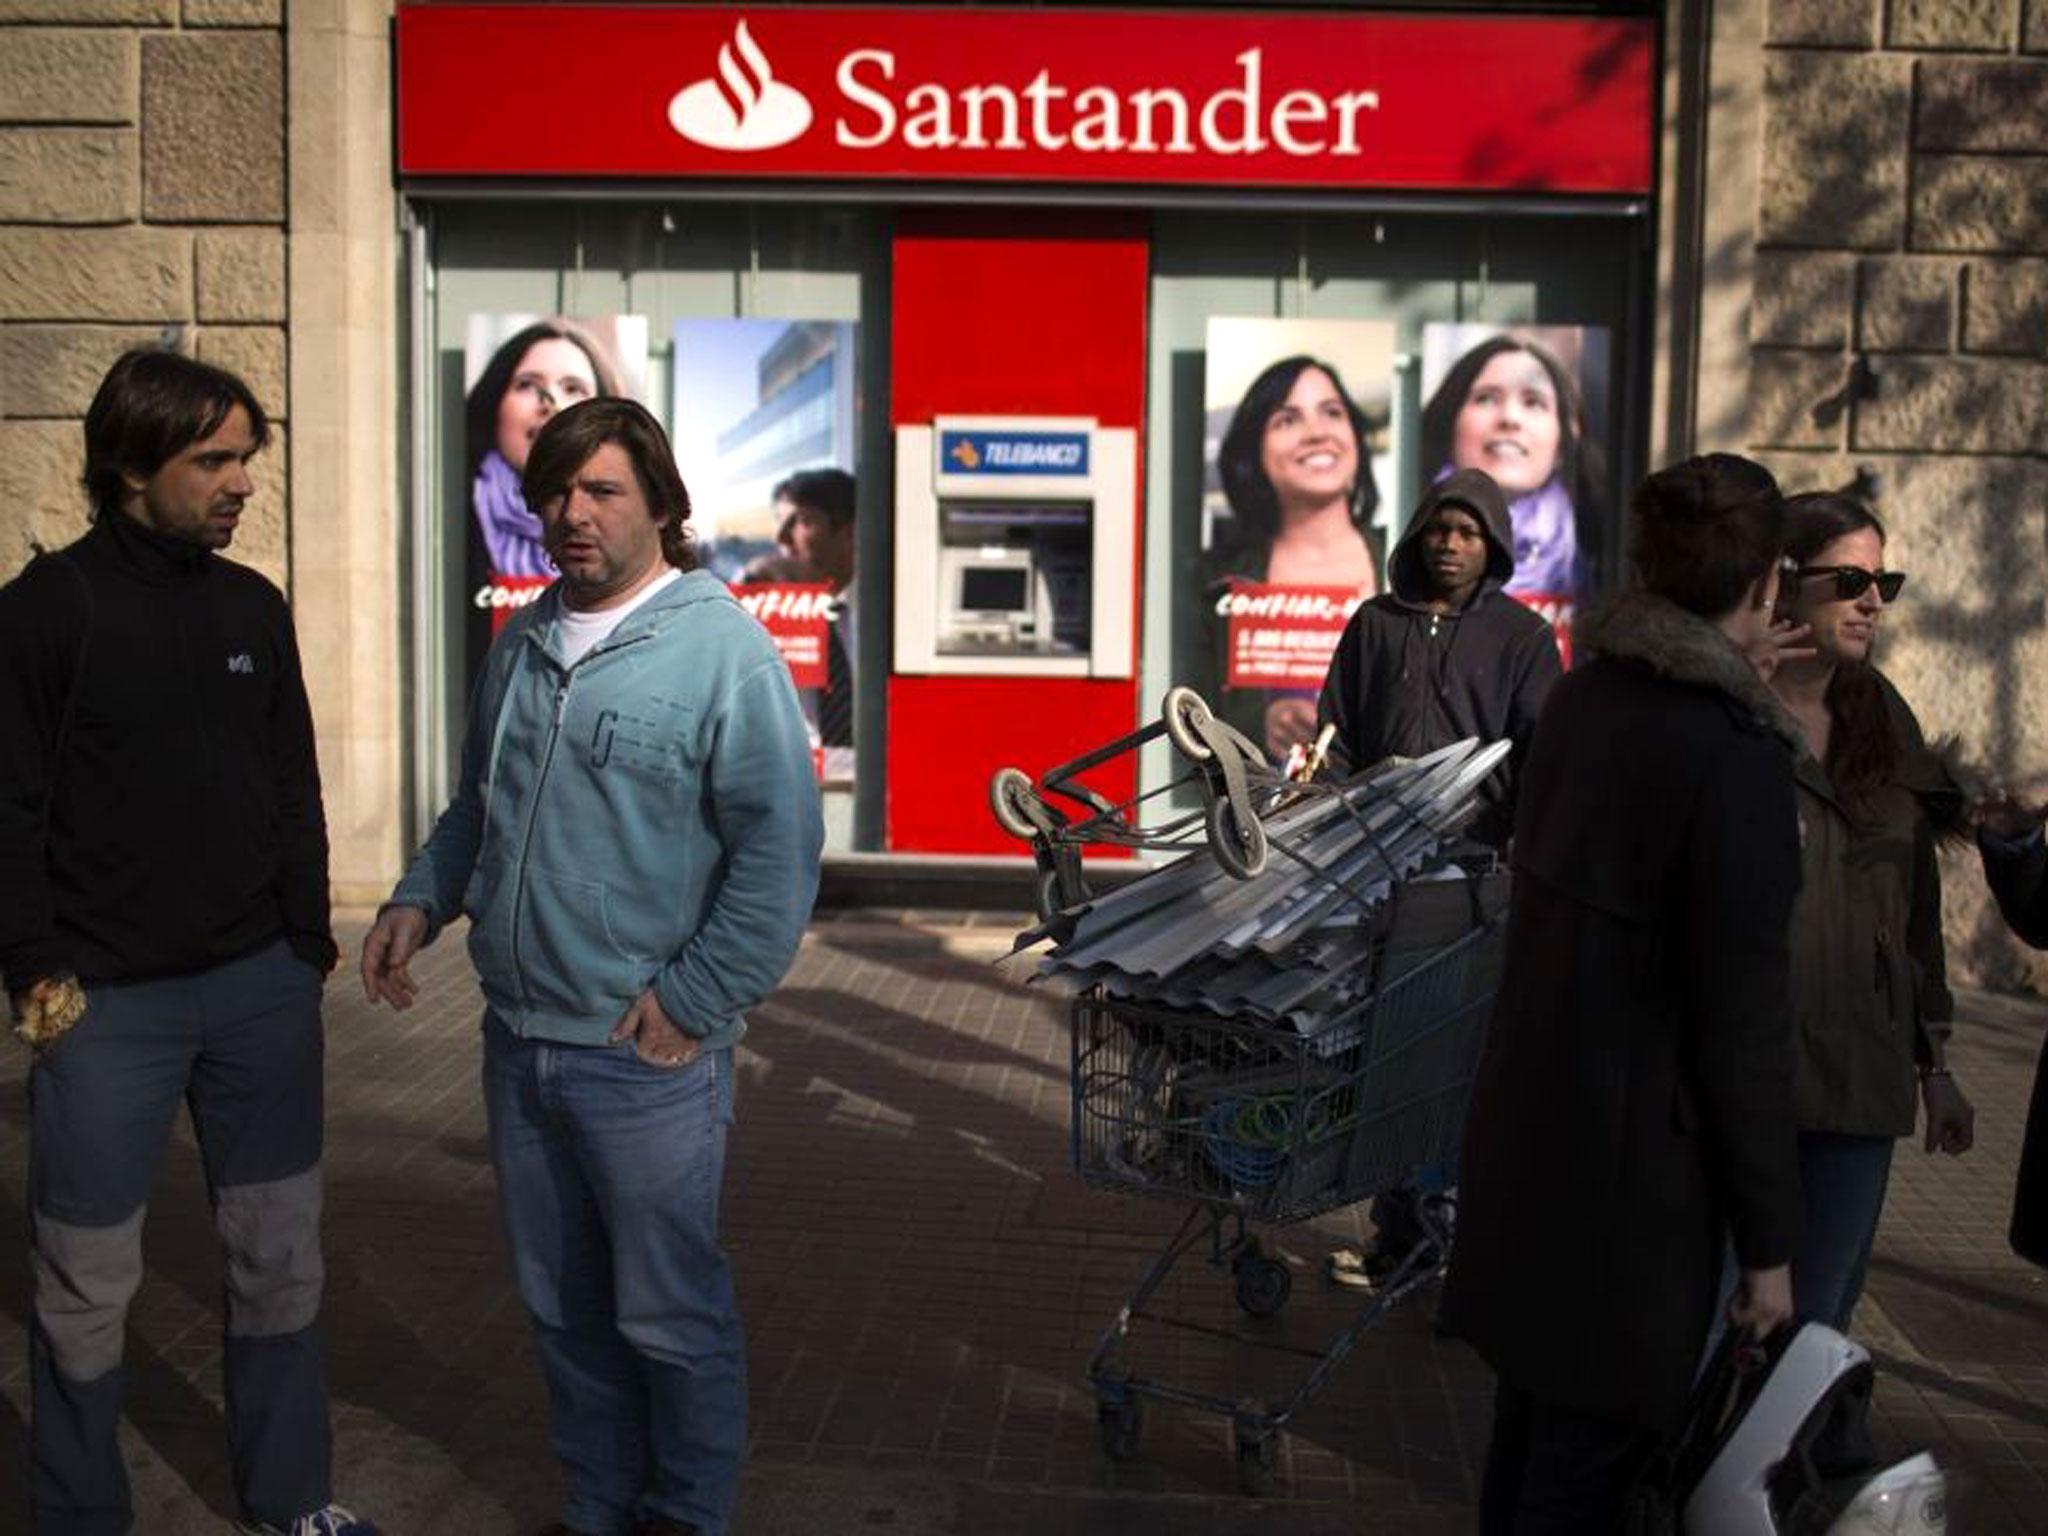 A Santander branch in Barcelona. More than half-a-million savers will be affected by the rate cut